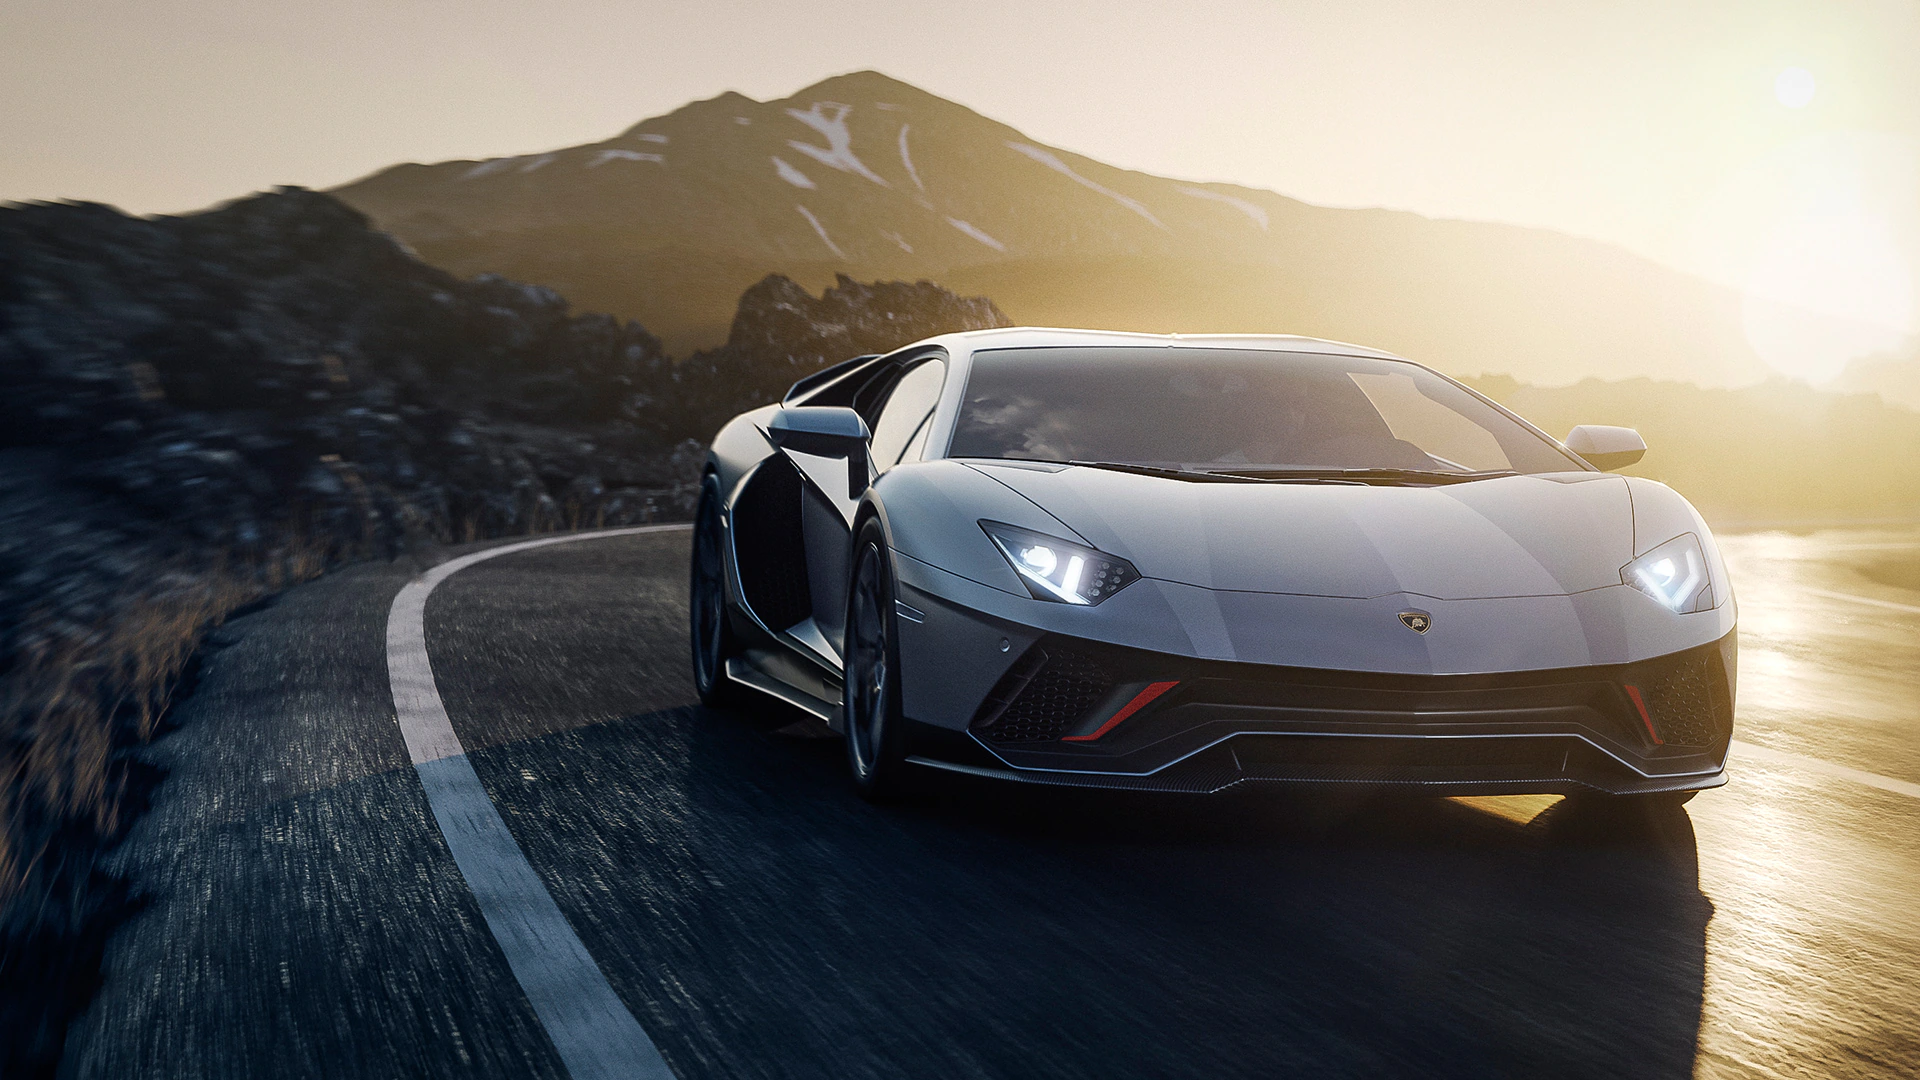 lamborghini coupe front angular view on the background of mountains